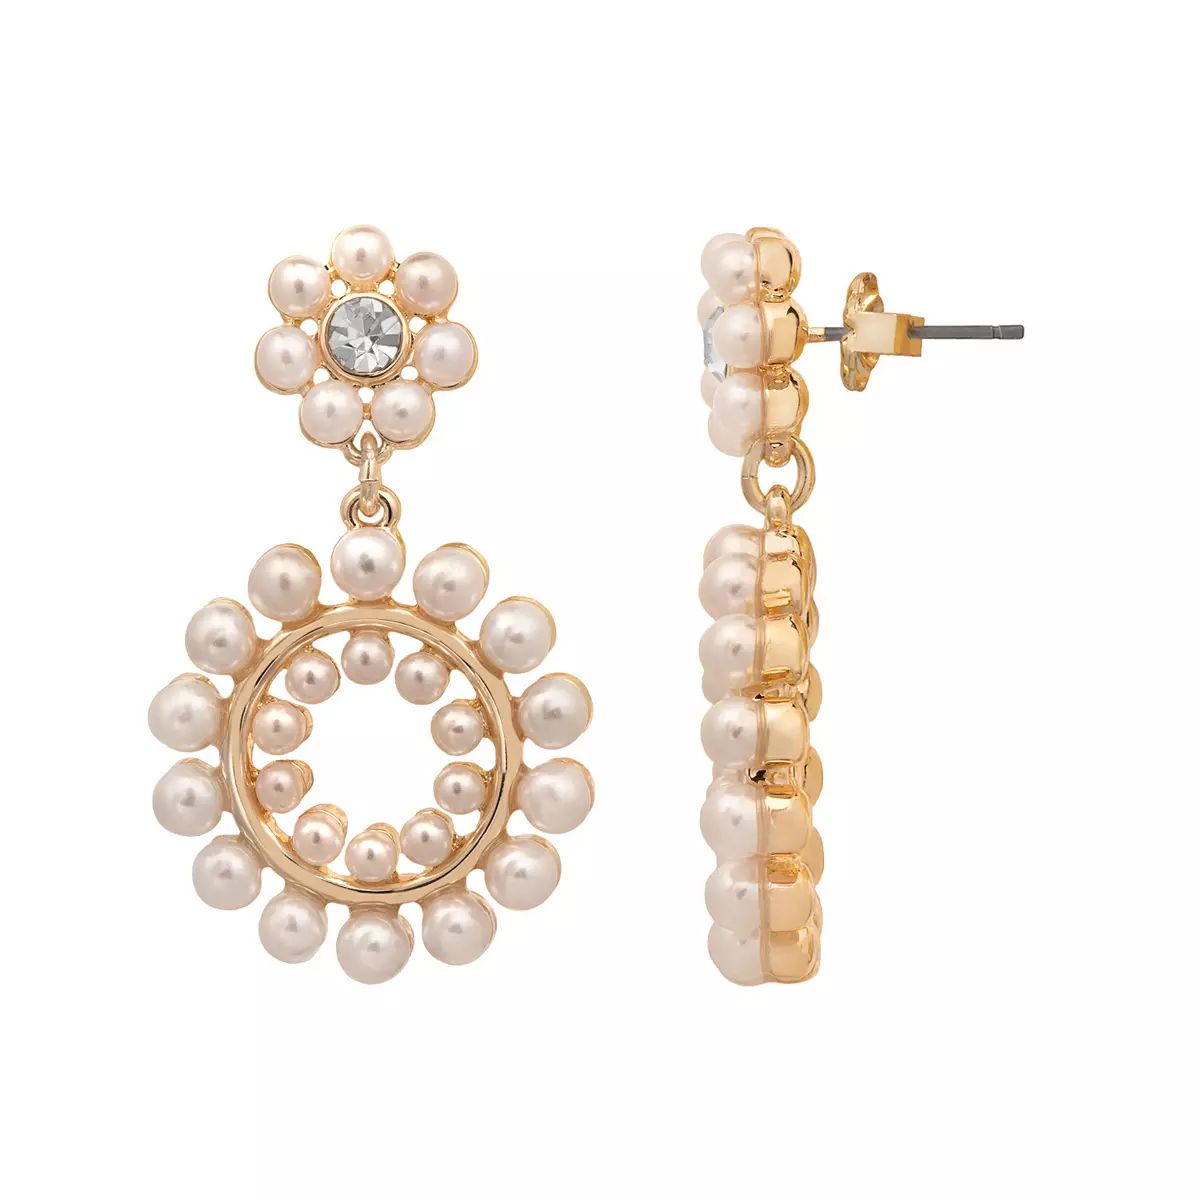 DRAPER JAMES RSVP Gold Tone Crystal & Simulated Pearl Flower Statement Drop Earrings | Kohl's